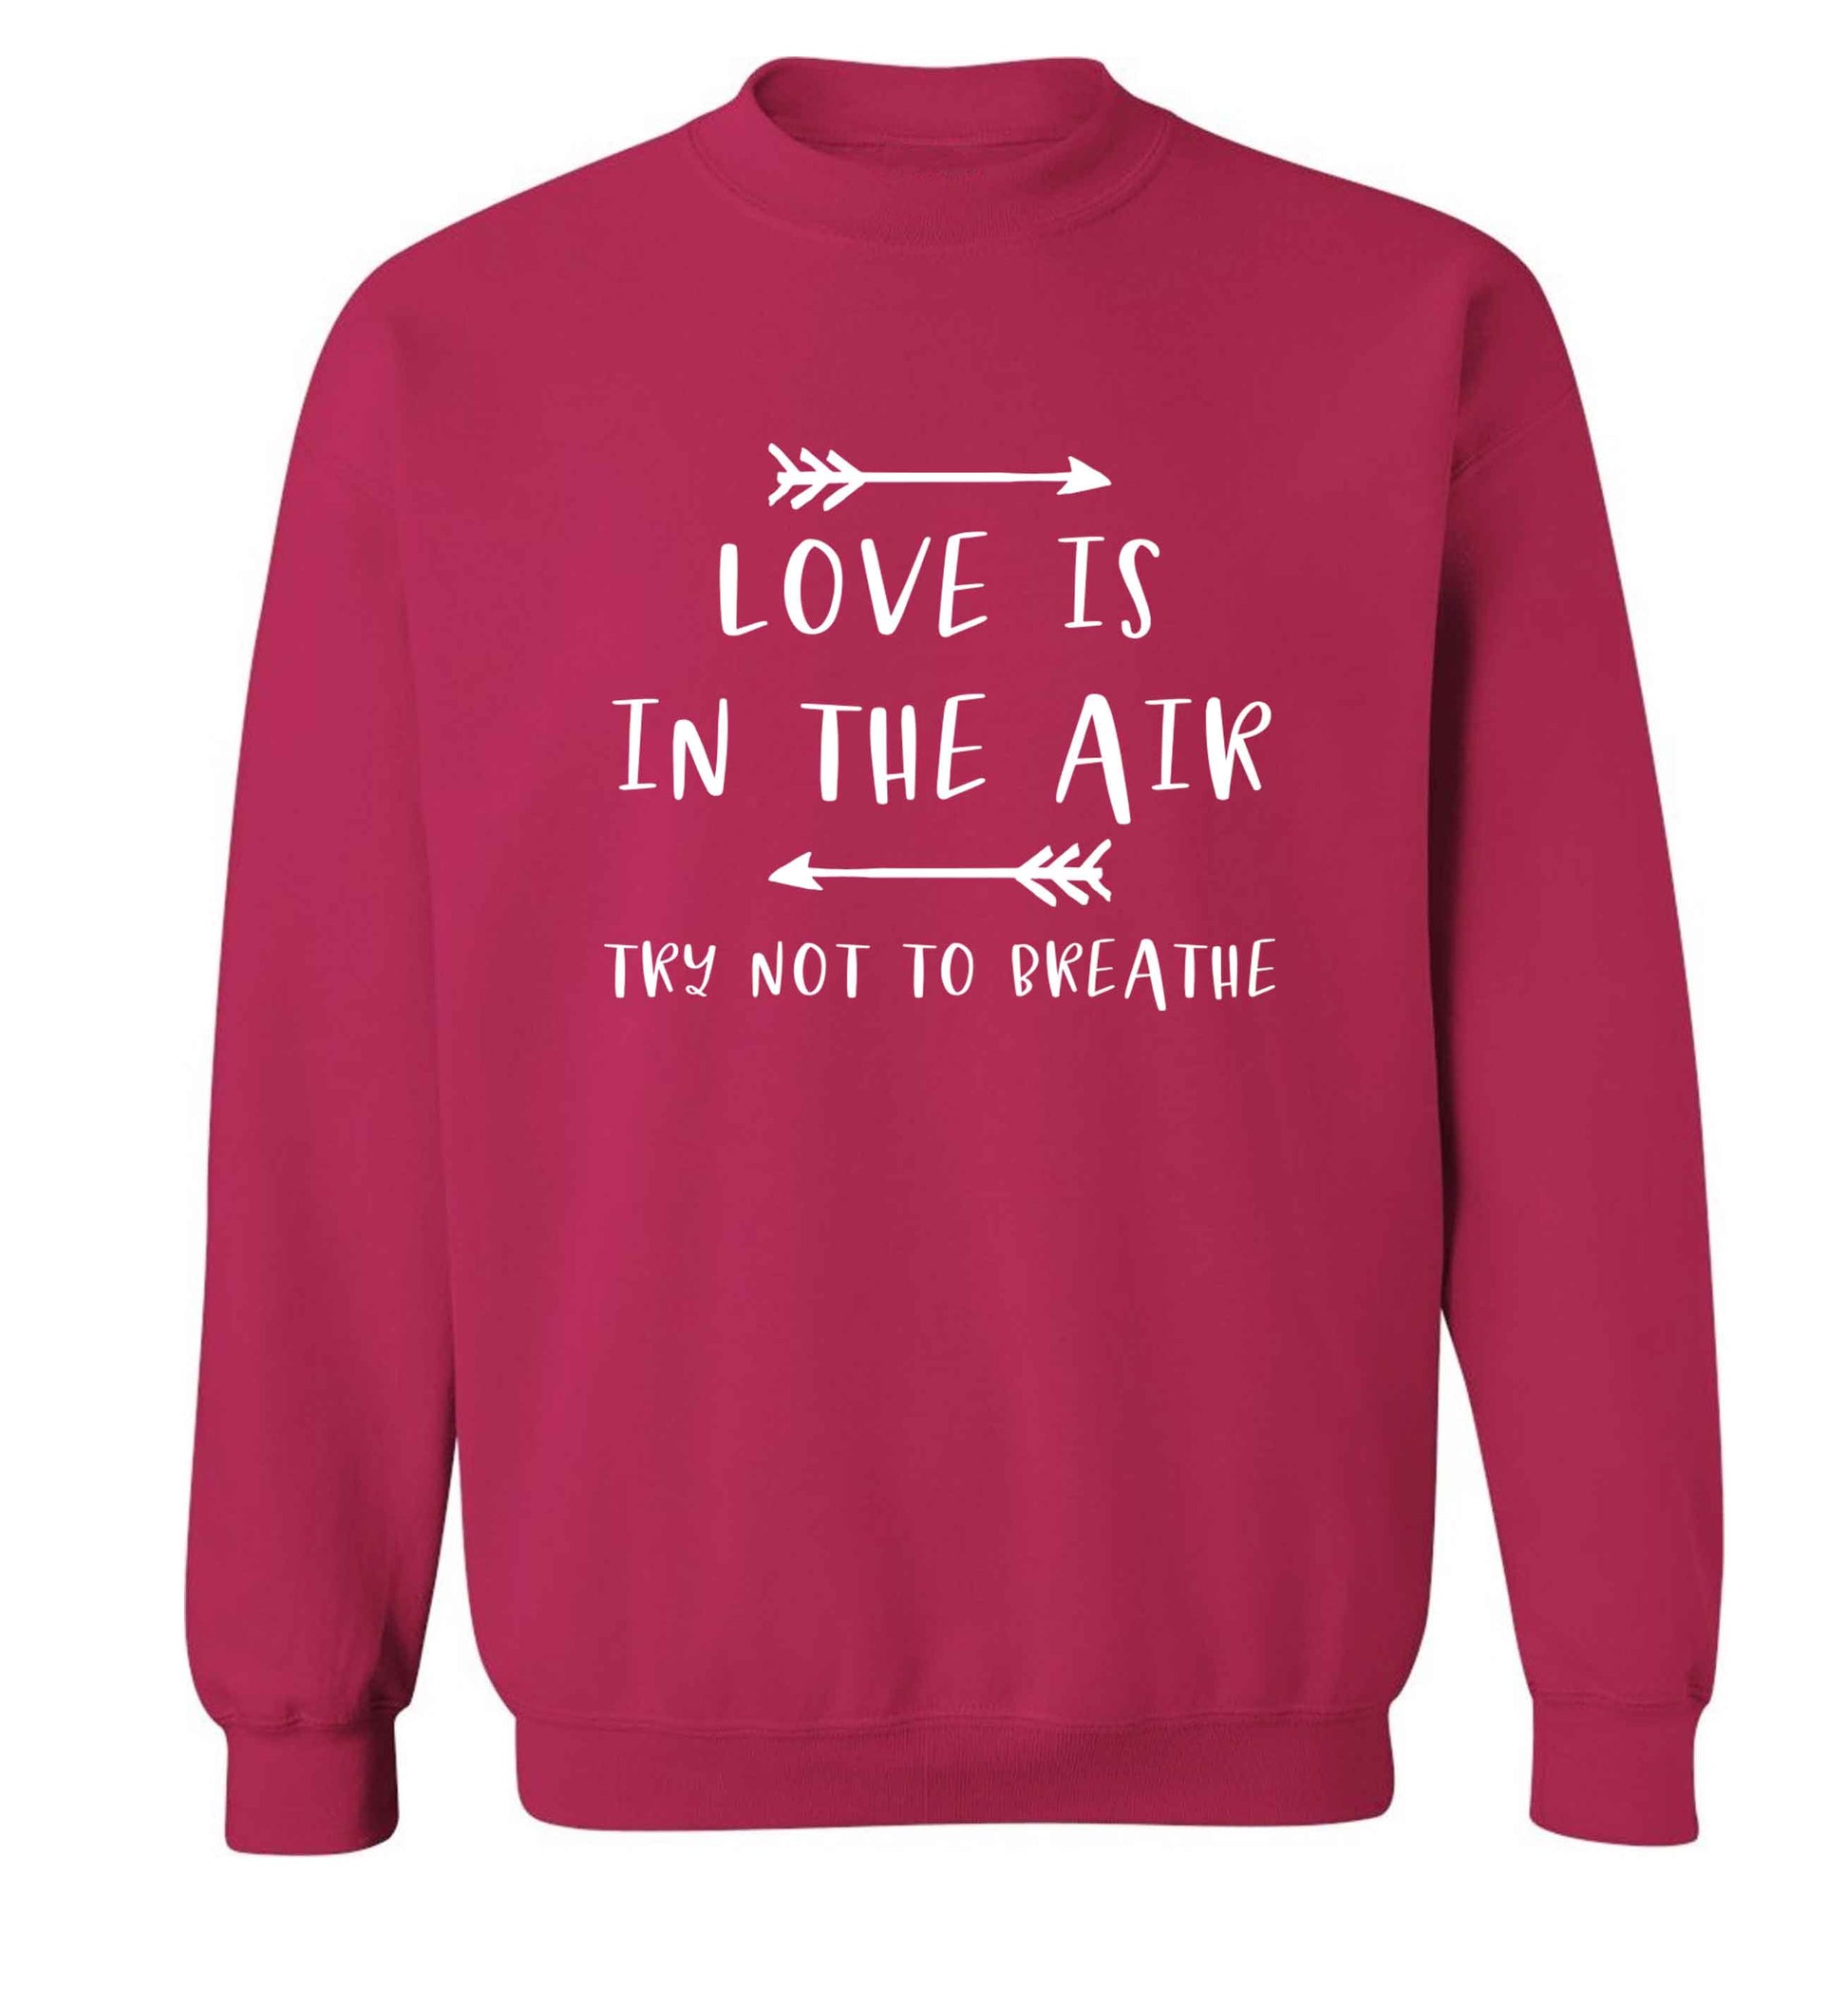 Love is in the air try not to breathe adult's unisex pink sweater 2XL